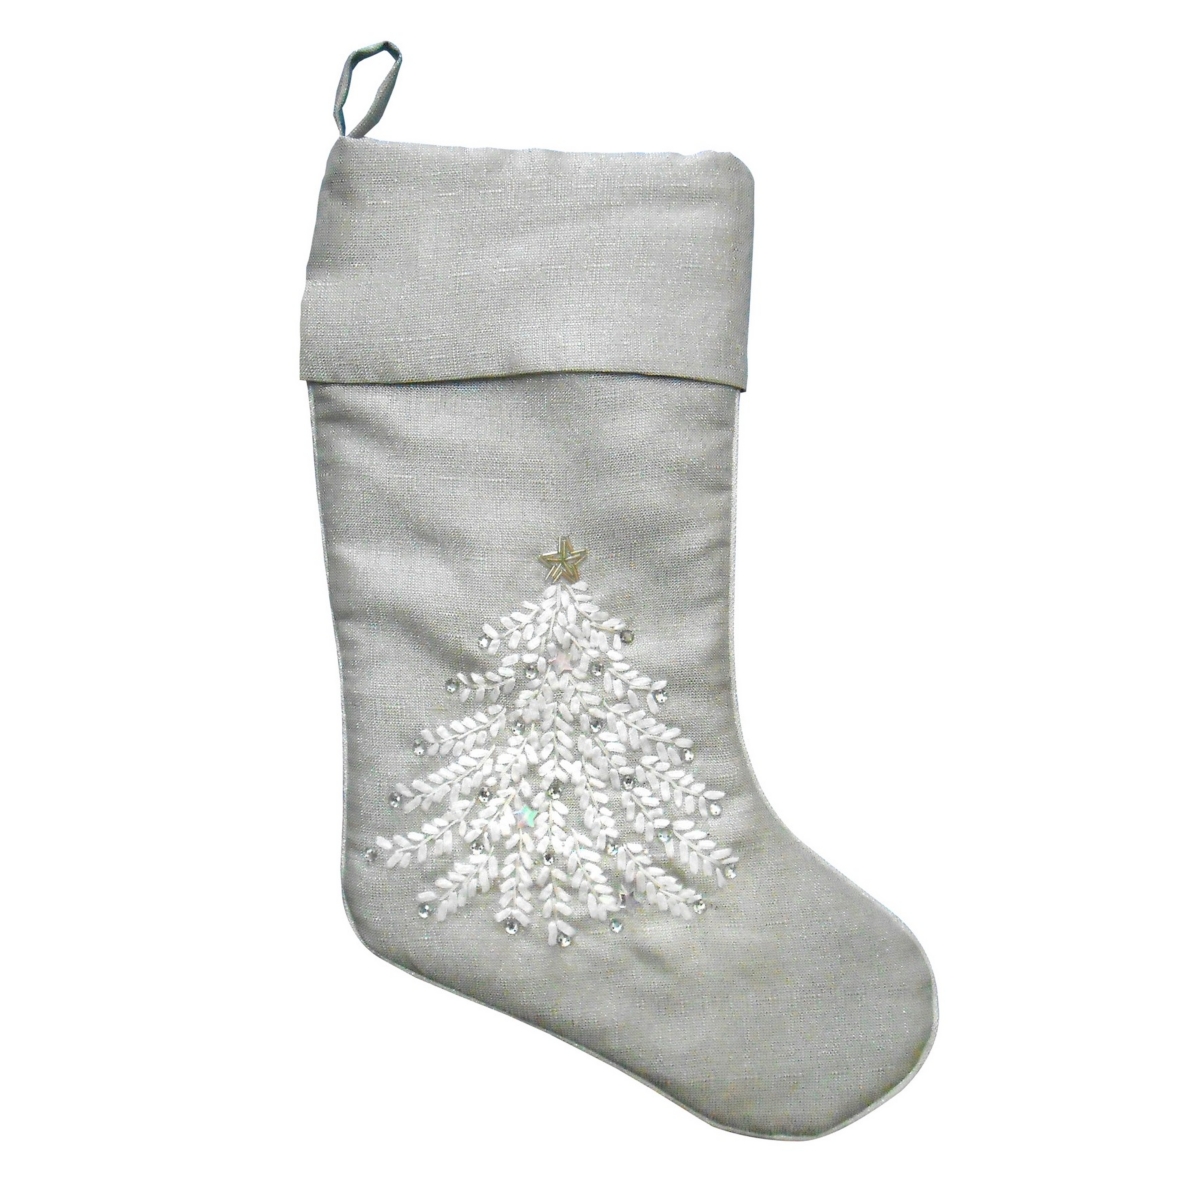 14" x 19" Silver Stocking with Xmas Design - Silver